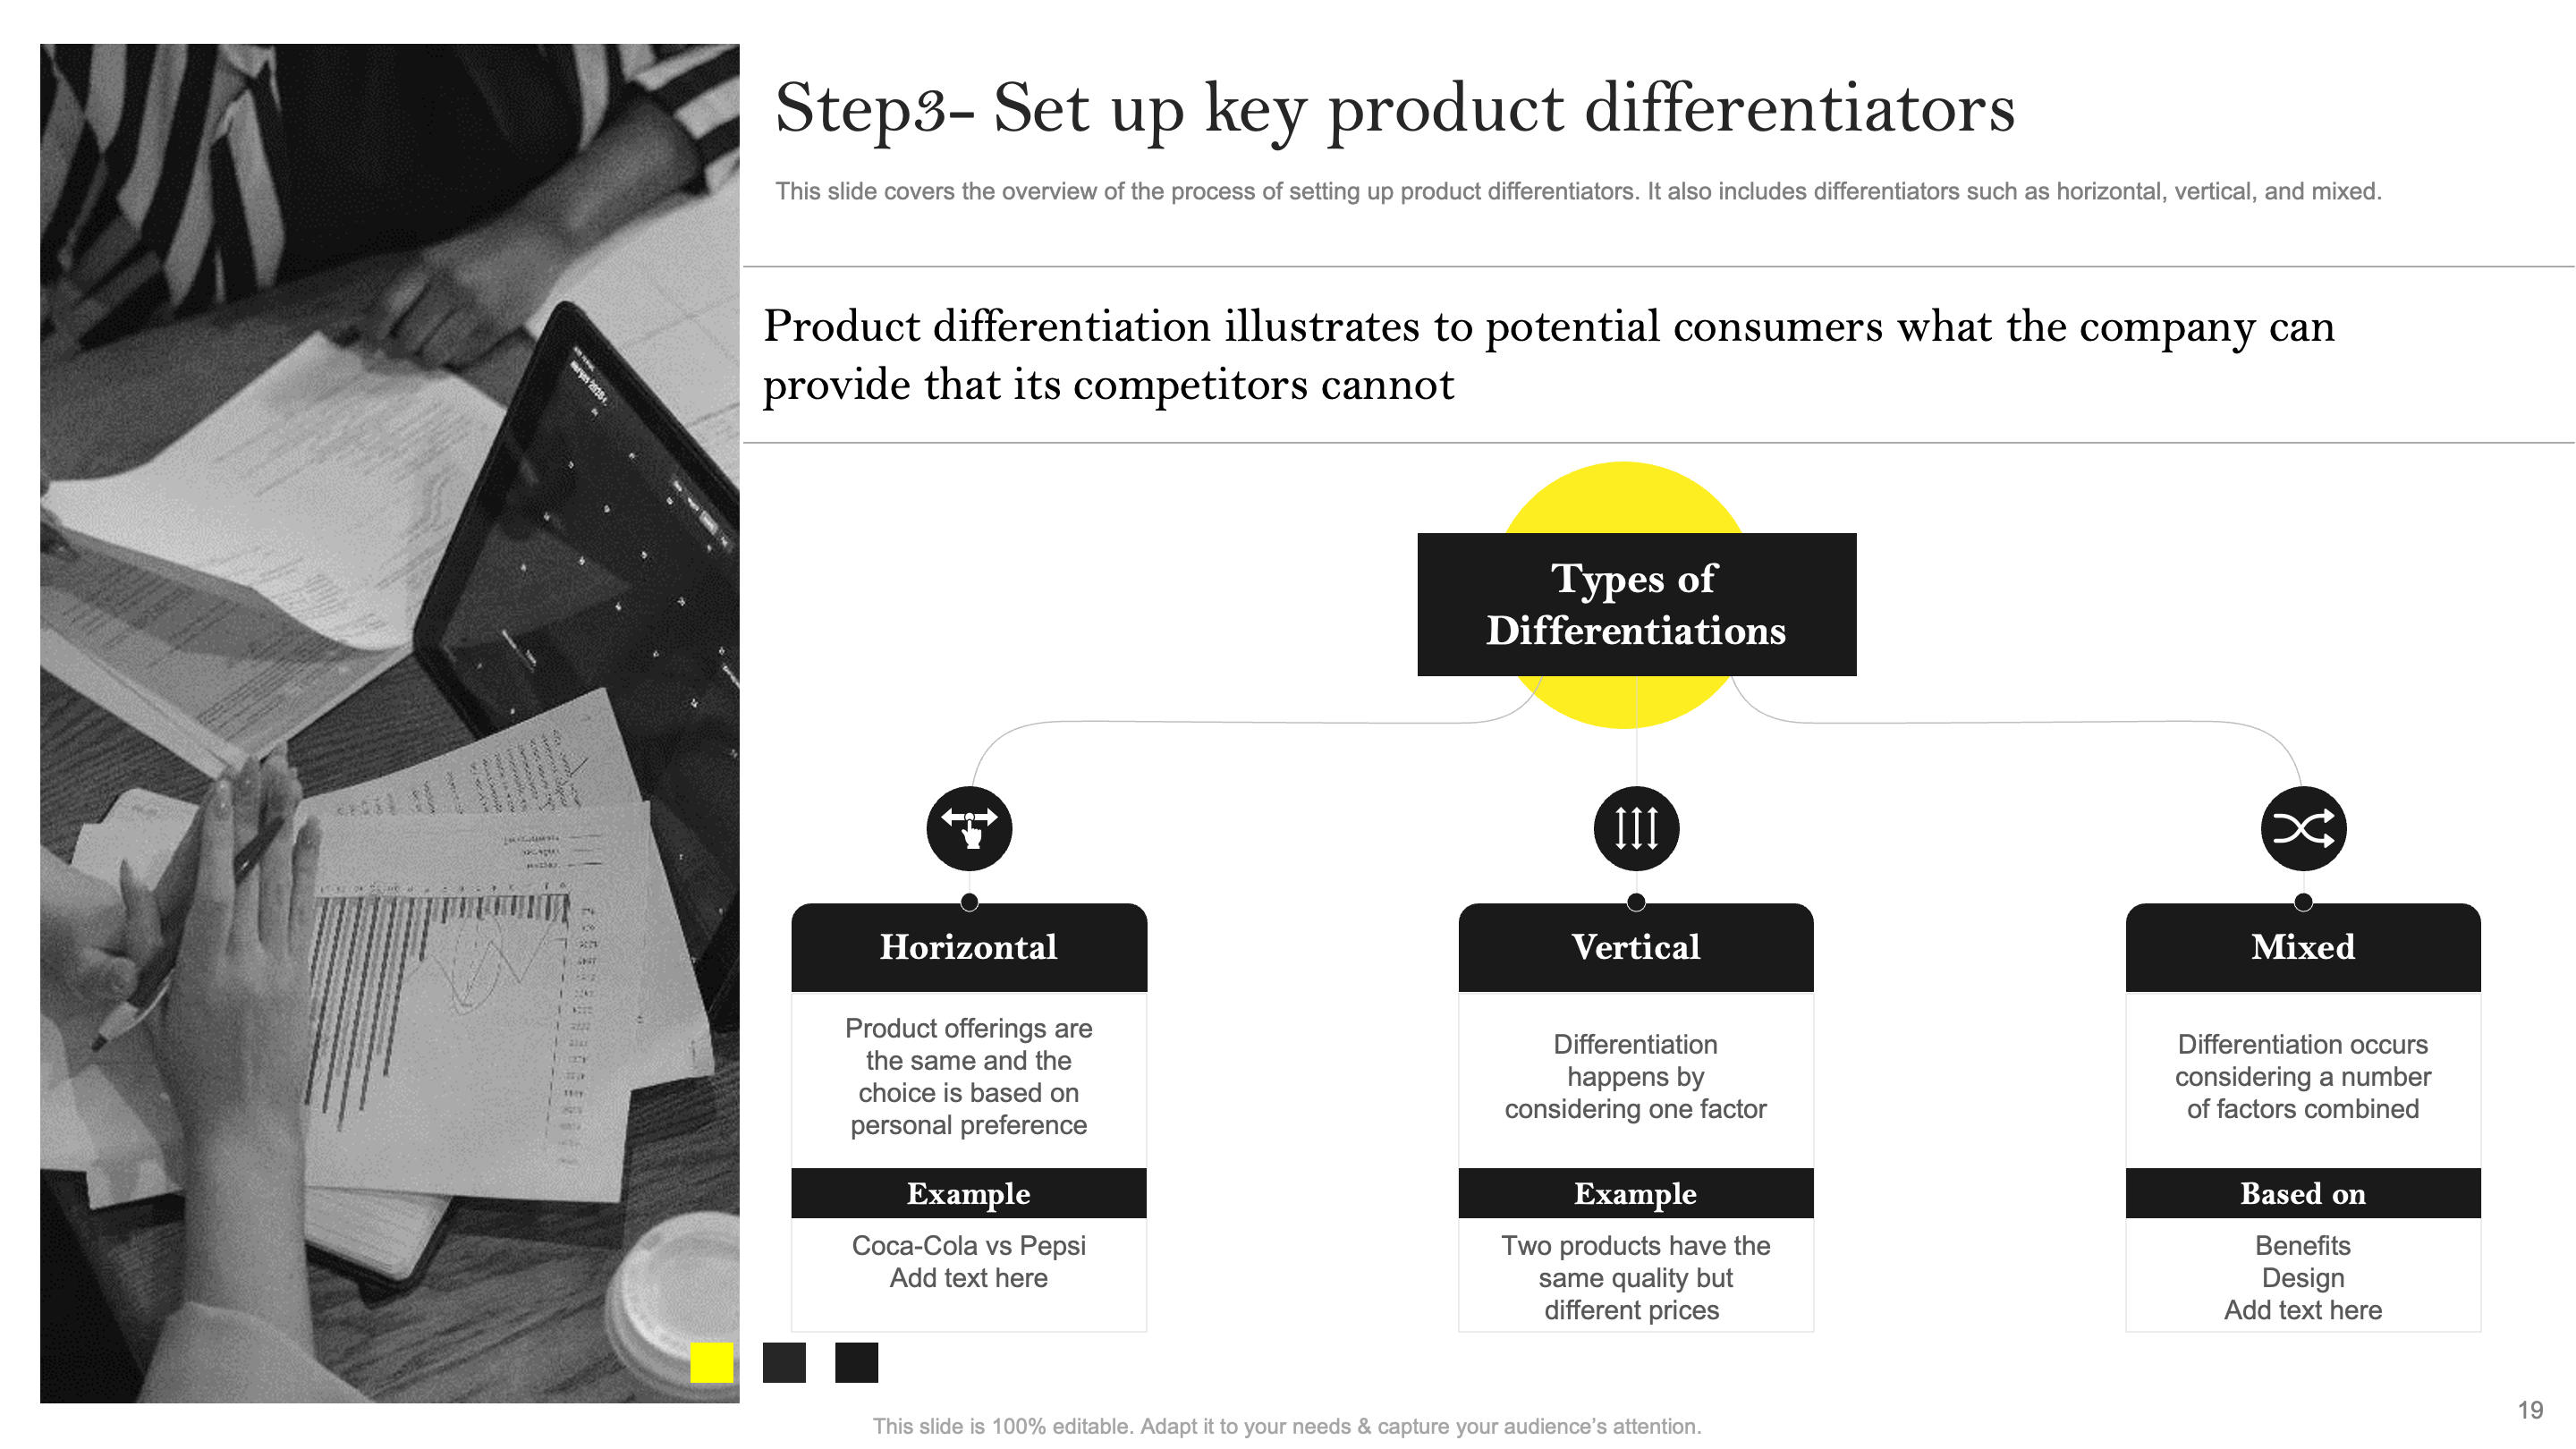 Setting up Key Product Differentiators